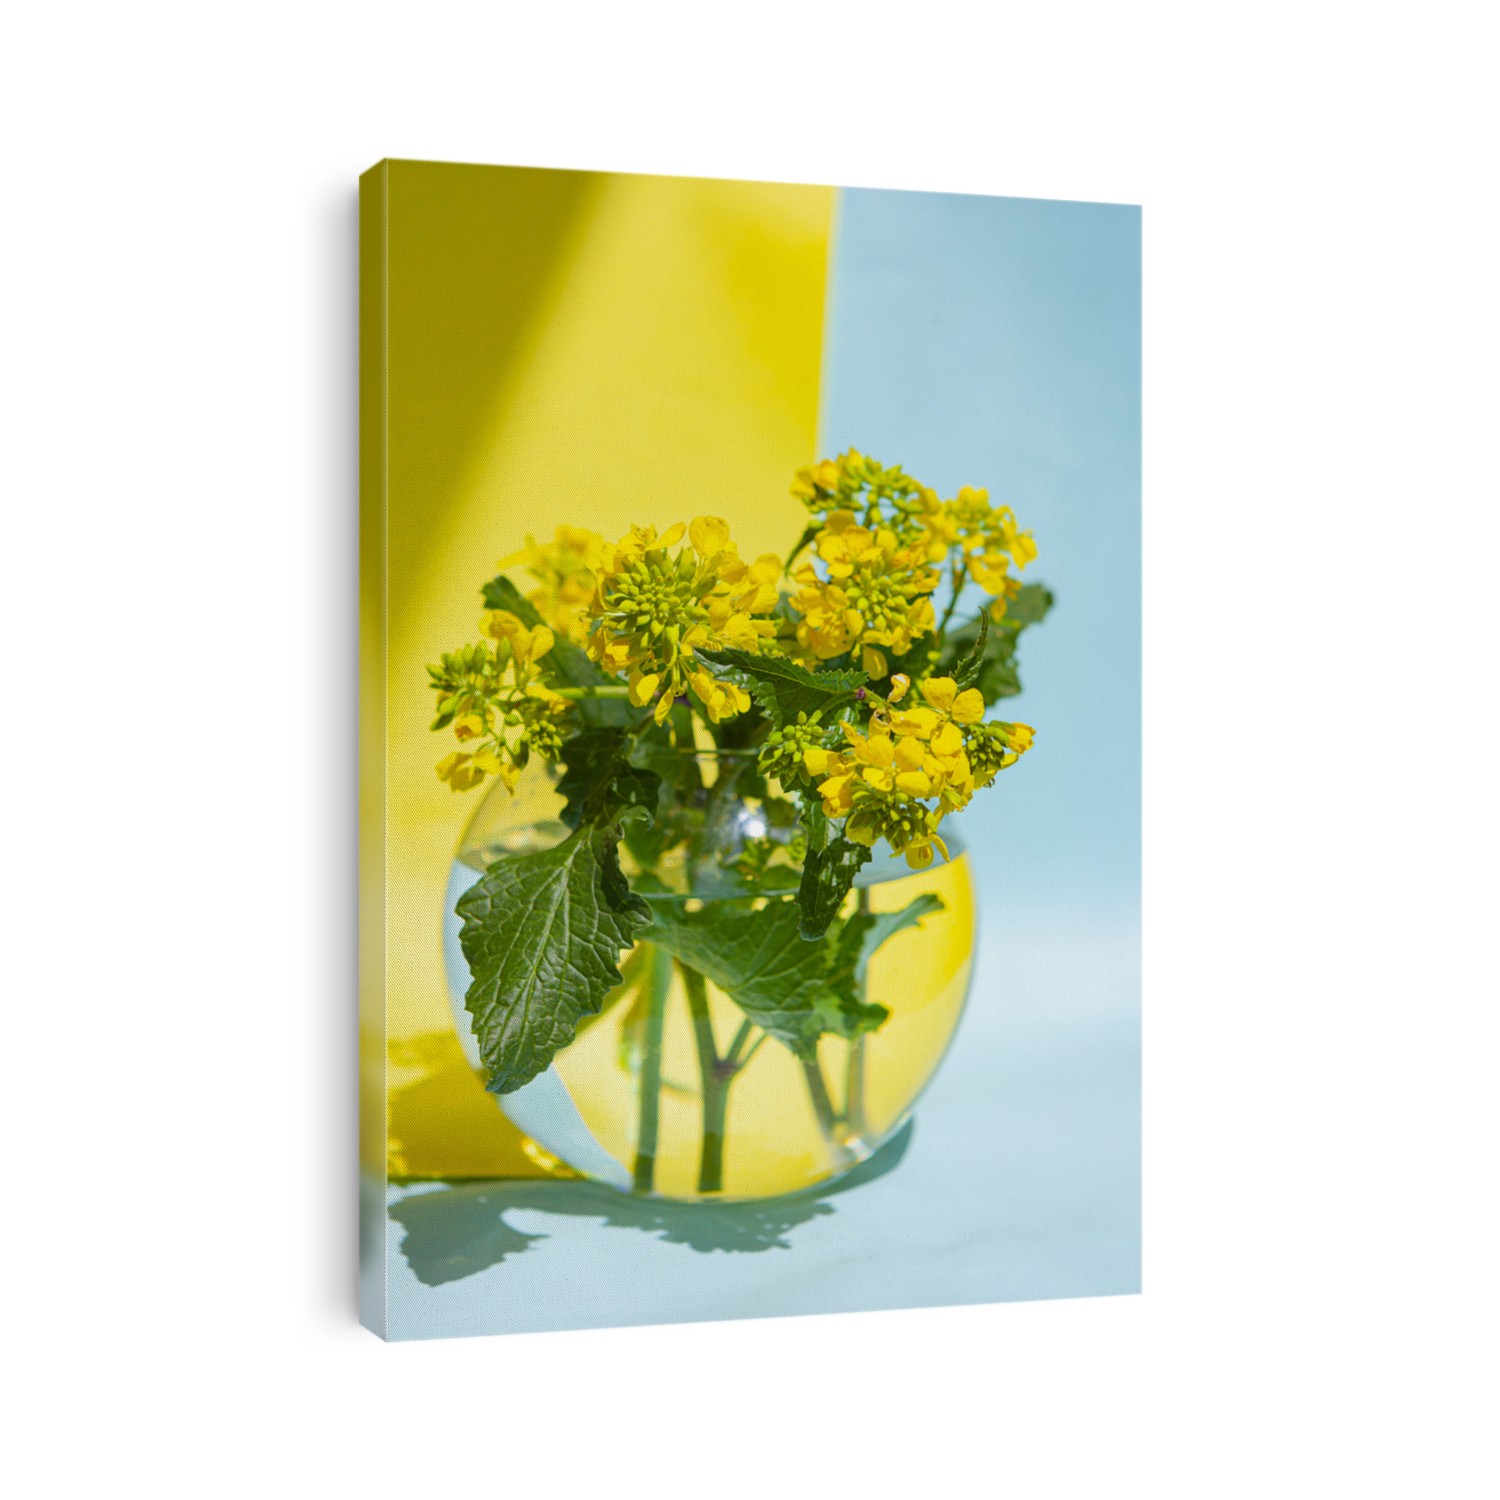 Sinapis arvensis, mustard spring yellow blossom against in a glass vase with water drops. Bouquet of sinapis arvensis on a blue and yellow background. With space for your text-image